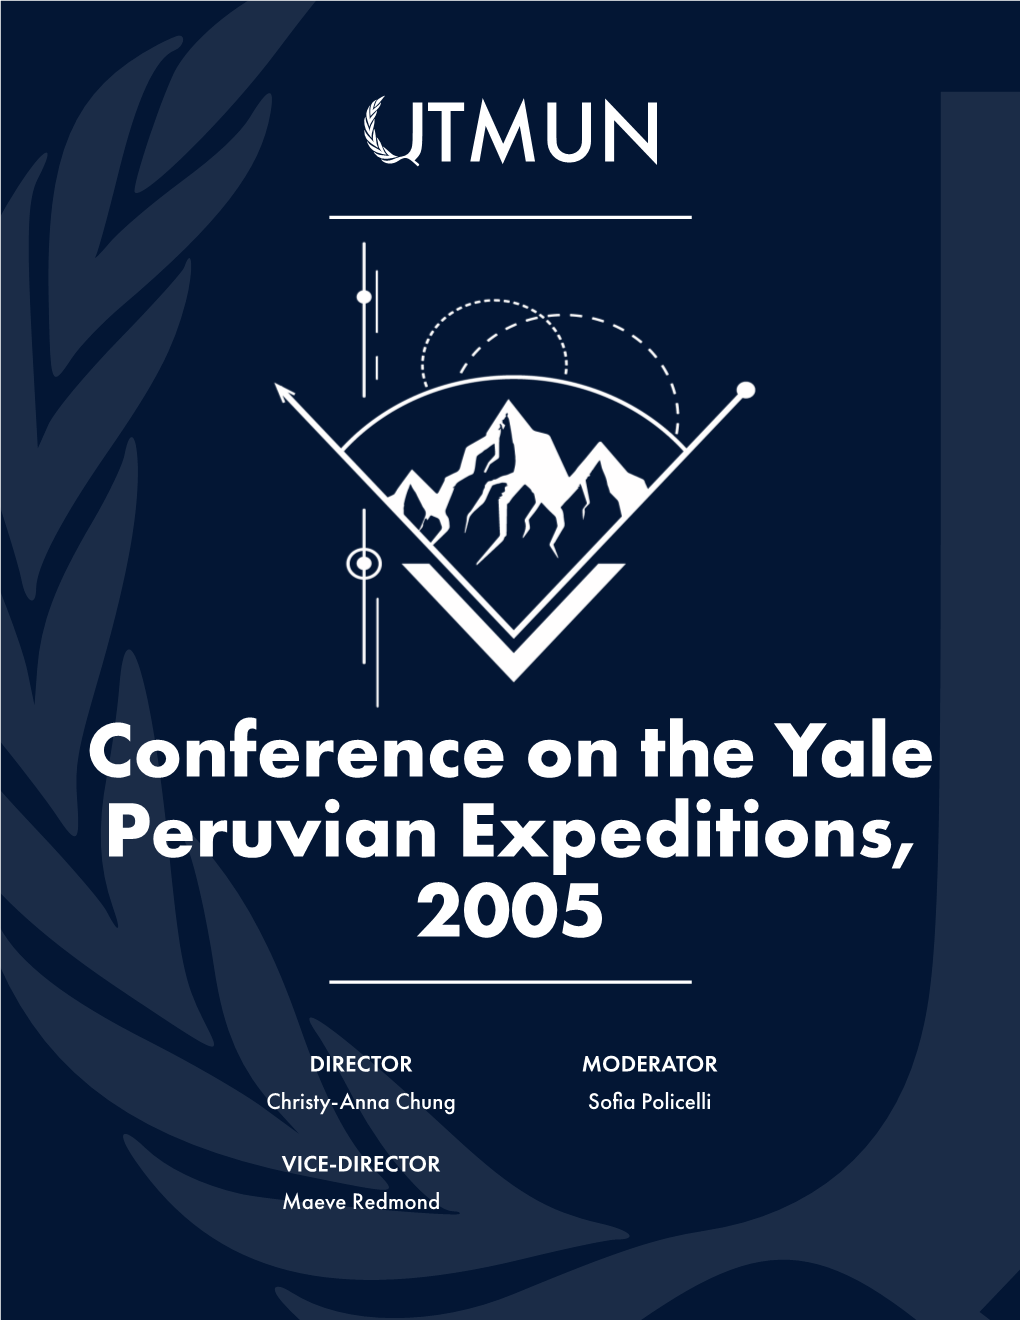 Conference on the Yale Peruvian Expeditions, 2005